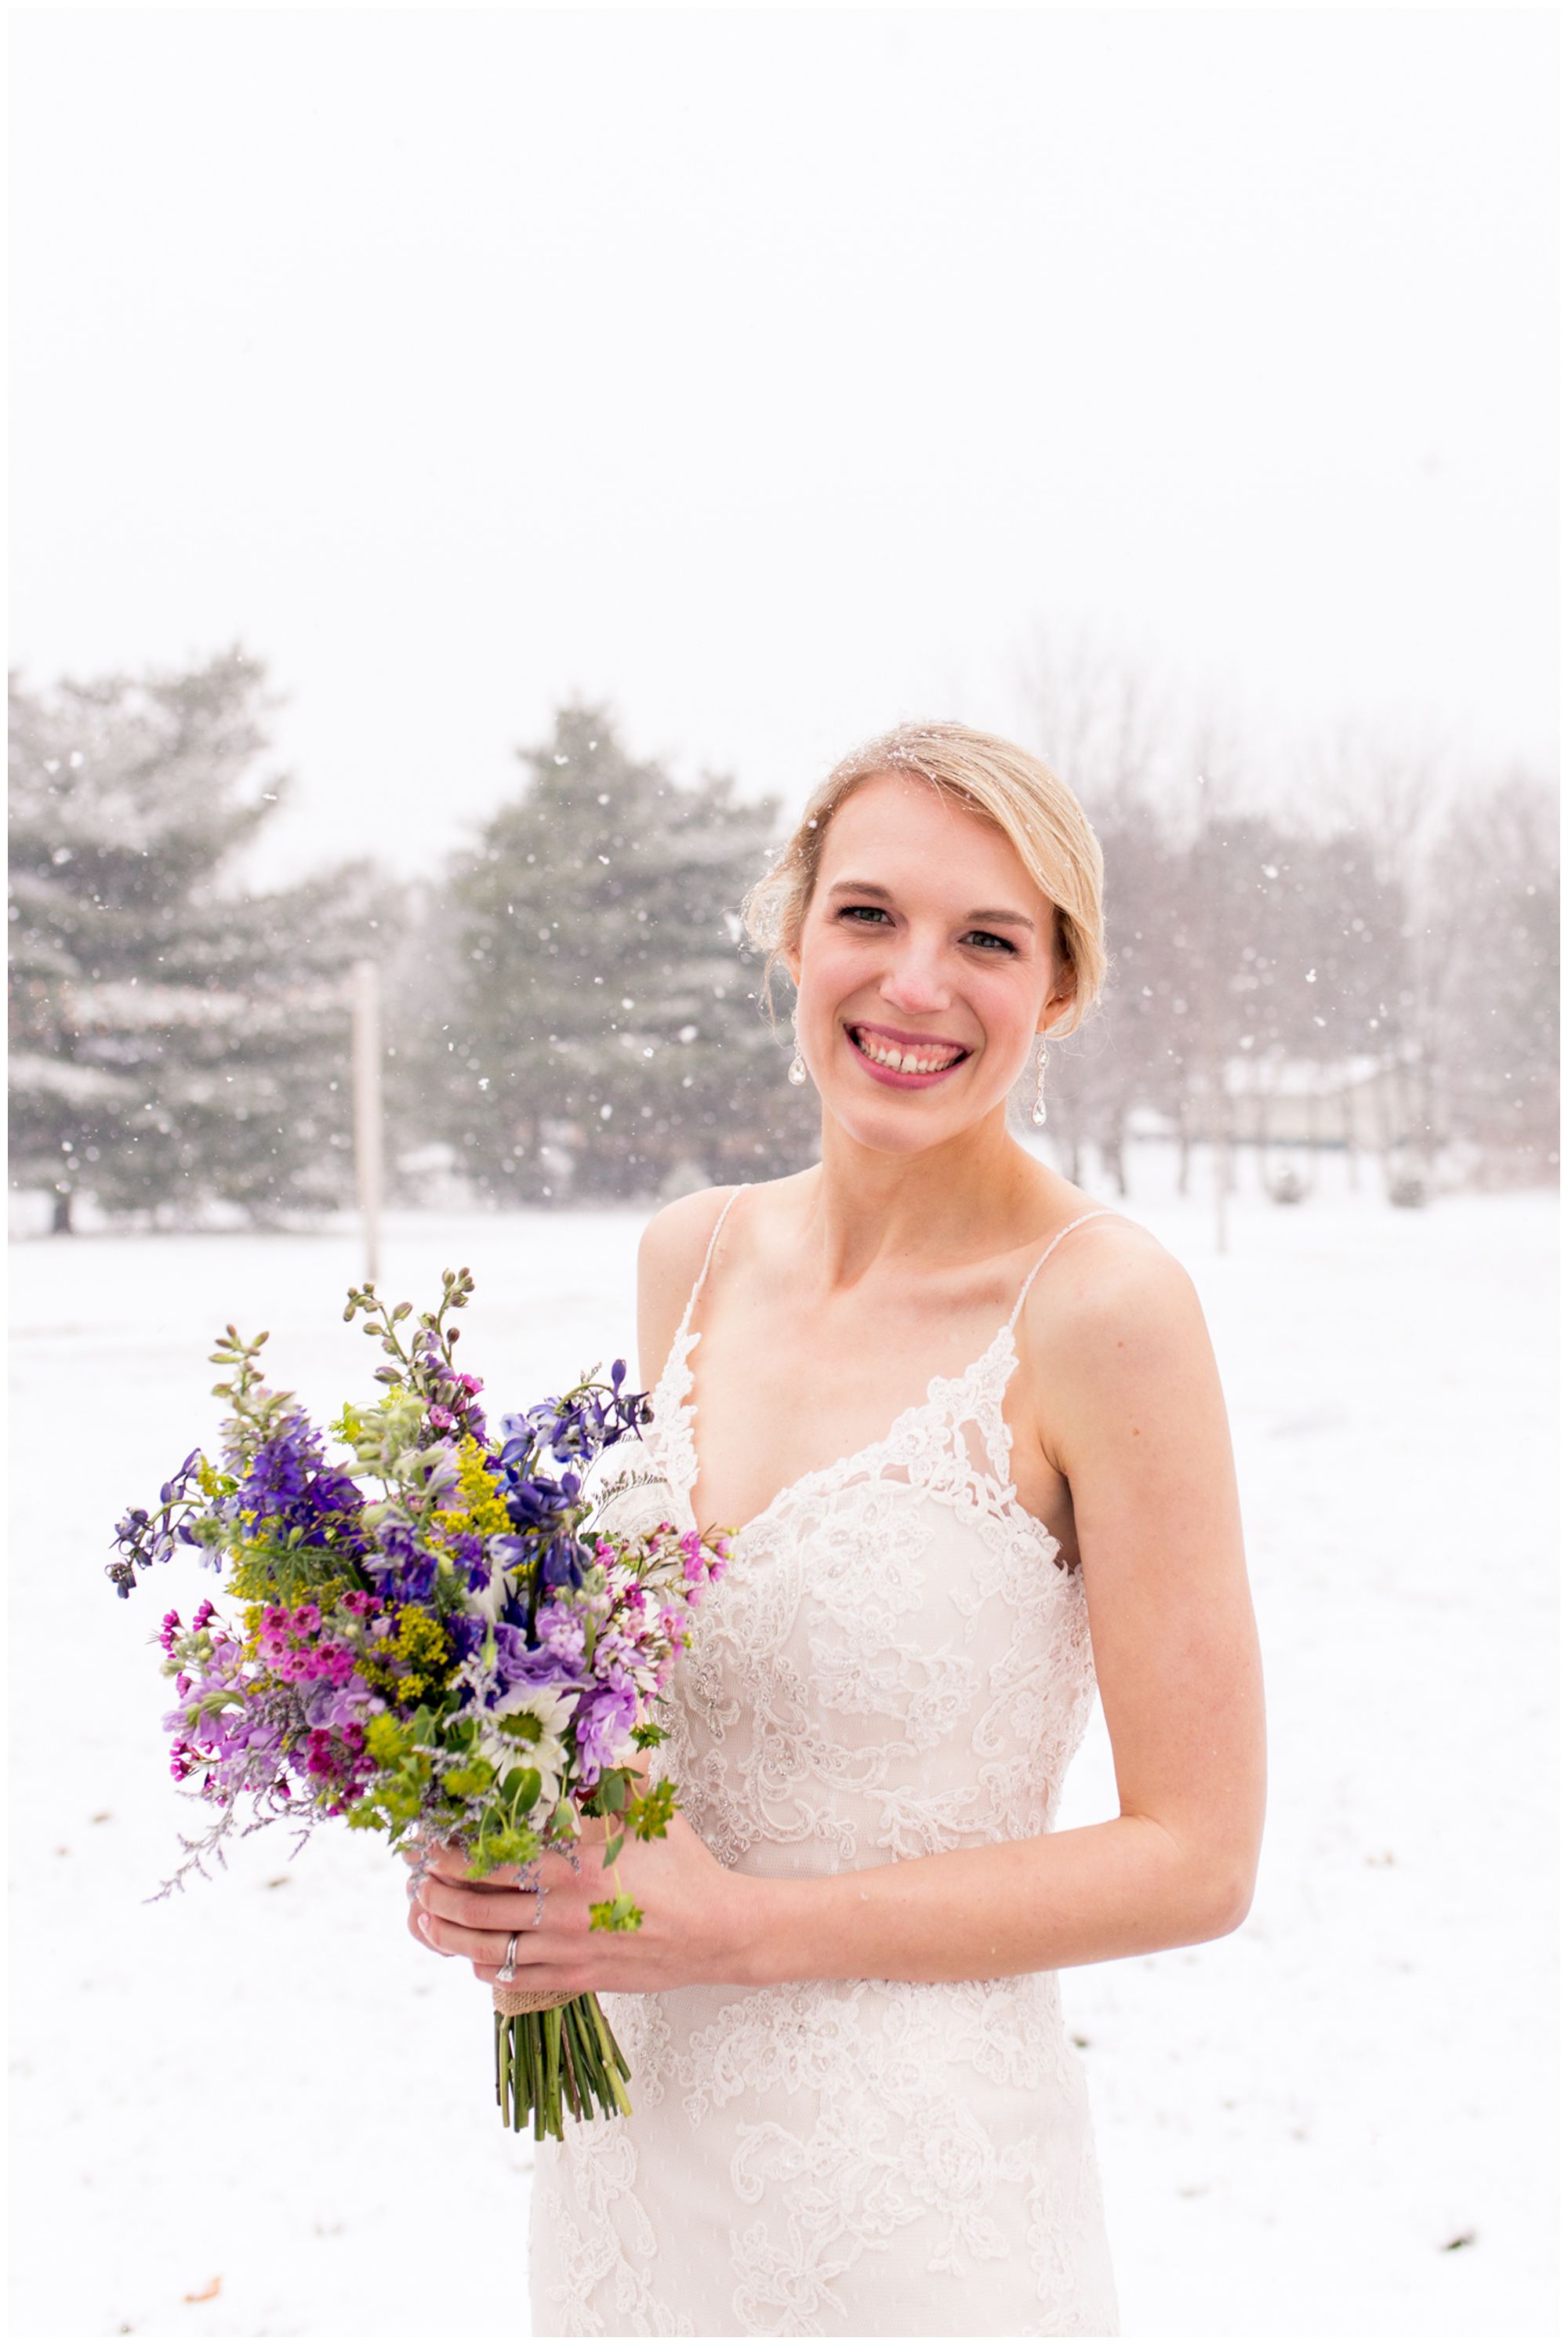 bride and groom snow wedding photos at Mustard Seed Gardens in Noblesville Indiana